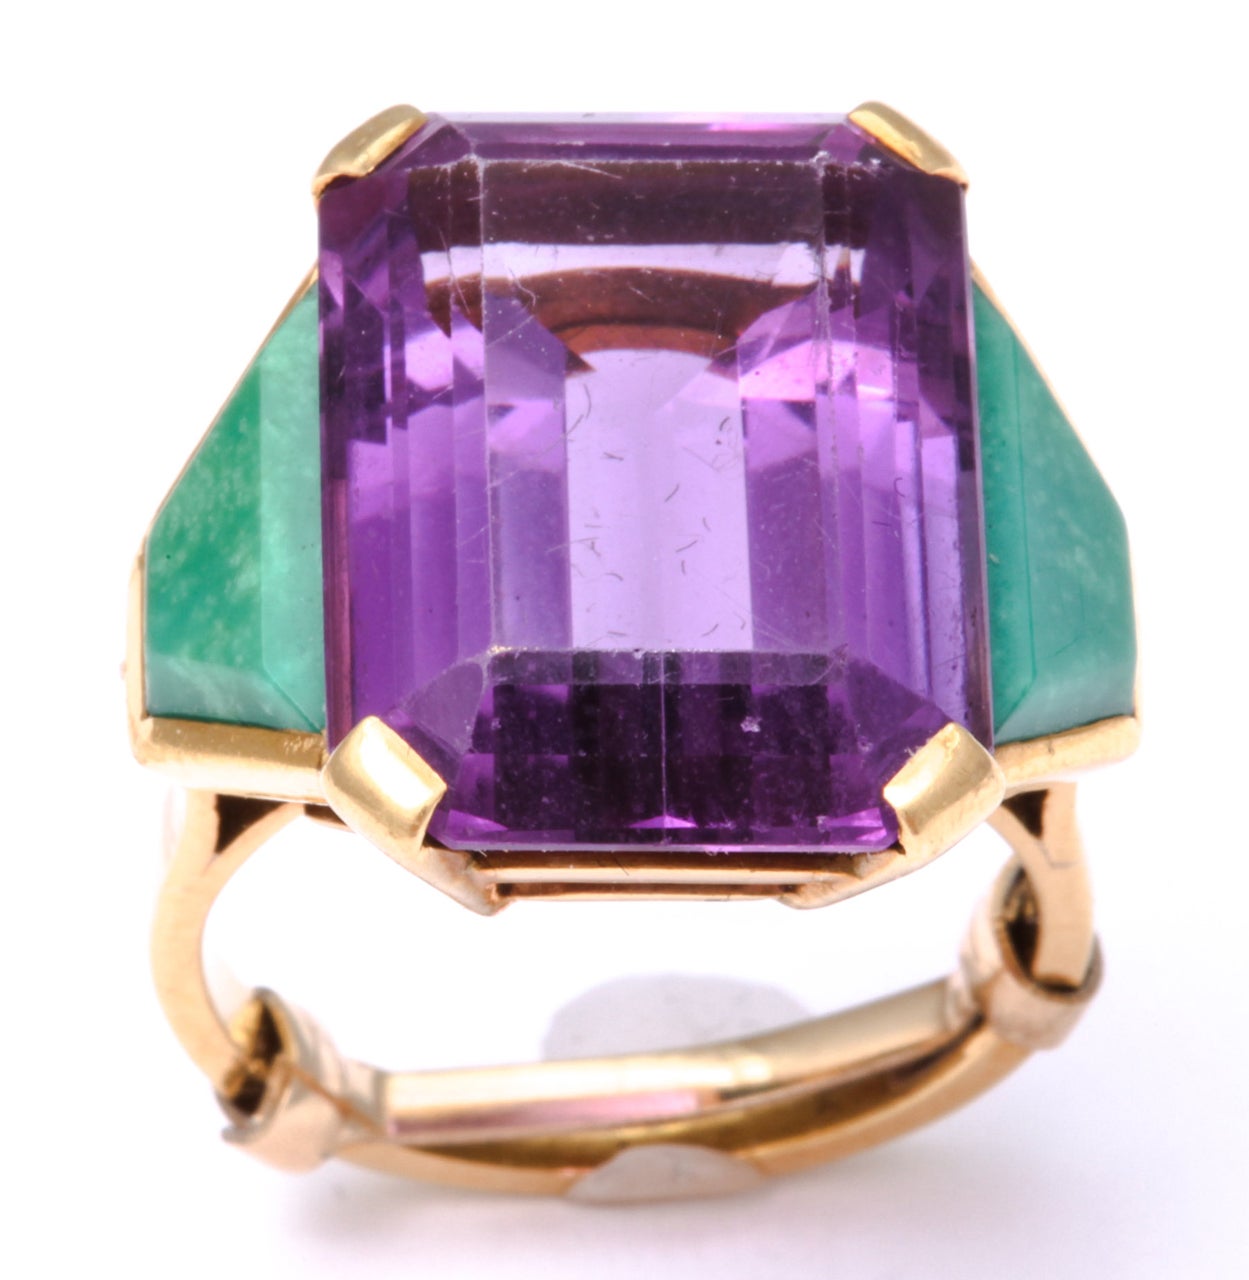 Hand made 18kt Yellow Gold Amethyst  set in 18kt Yellow Gold .  Baguettes unusually set with faceted  Amazonite Trapezoids.  Very stunning choice of colors.  Size 6 1/2